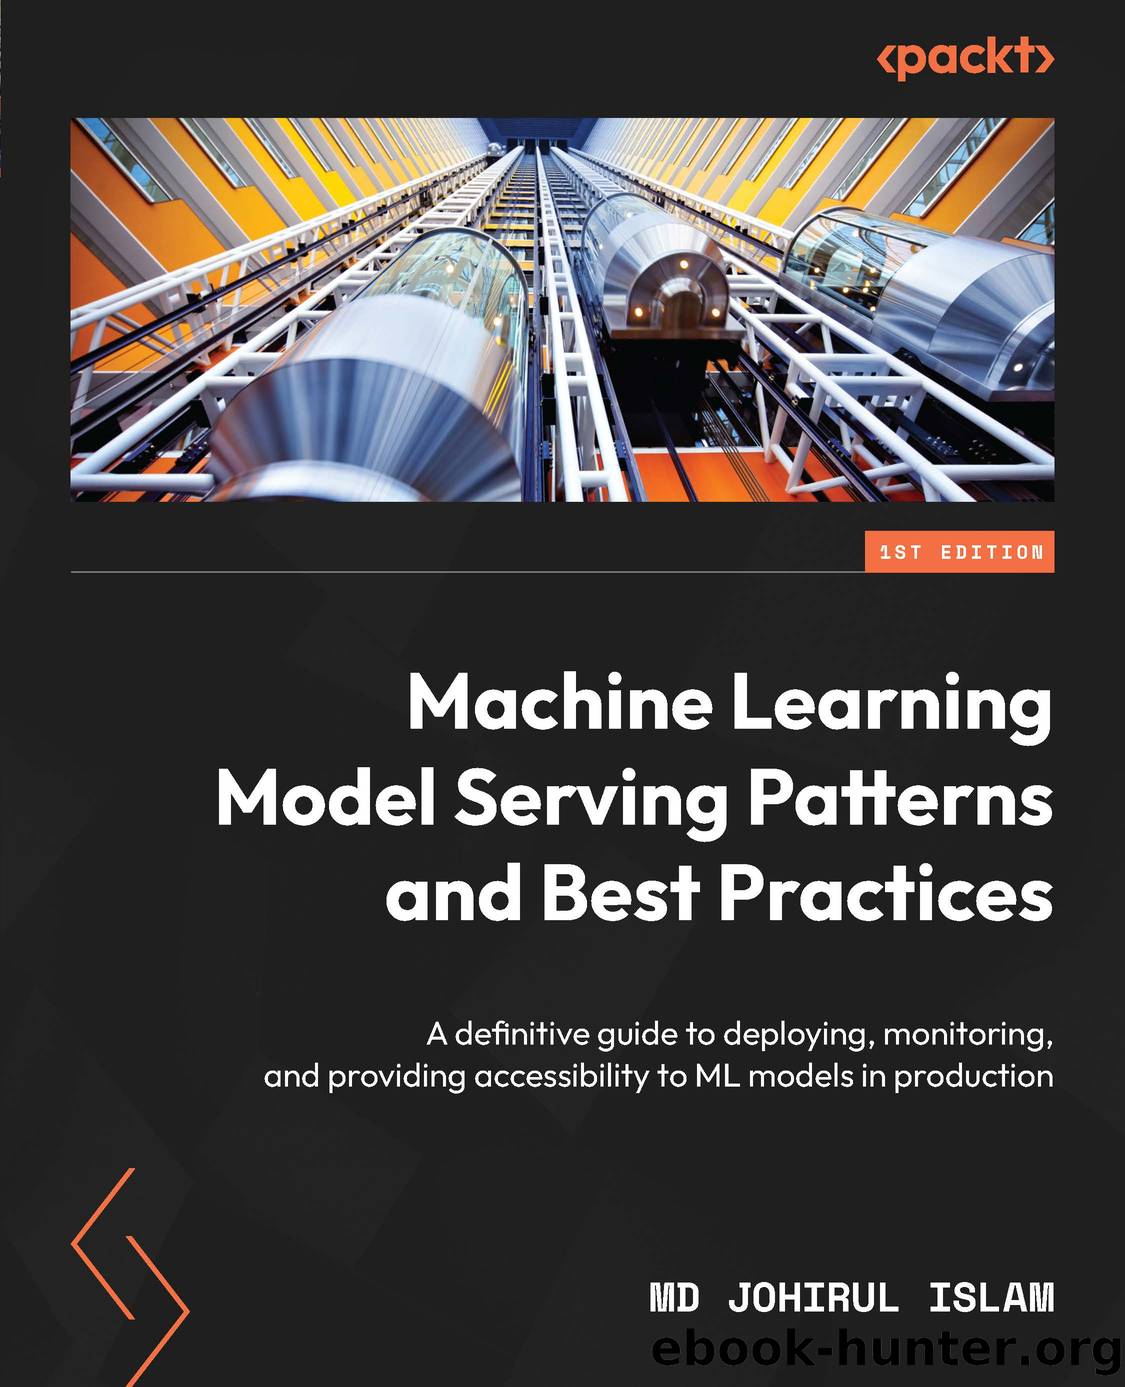 Machine Learning Model Serving Patterns and Best Practices by Md Johirul Islam